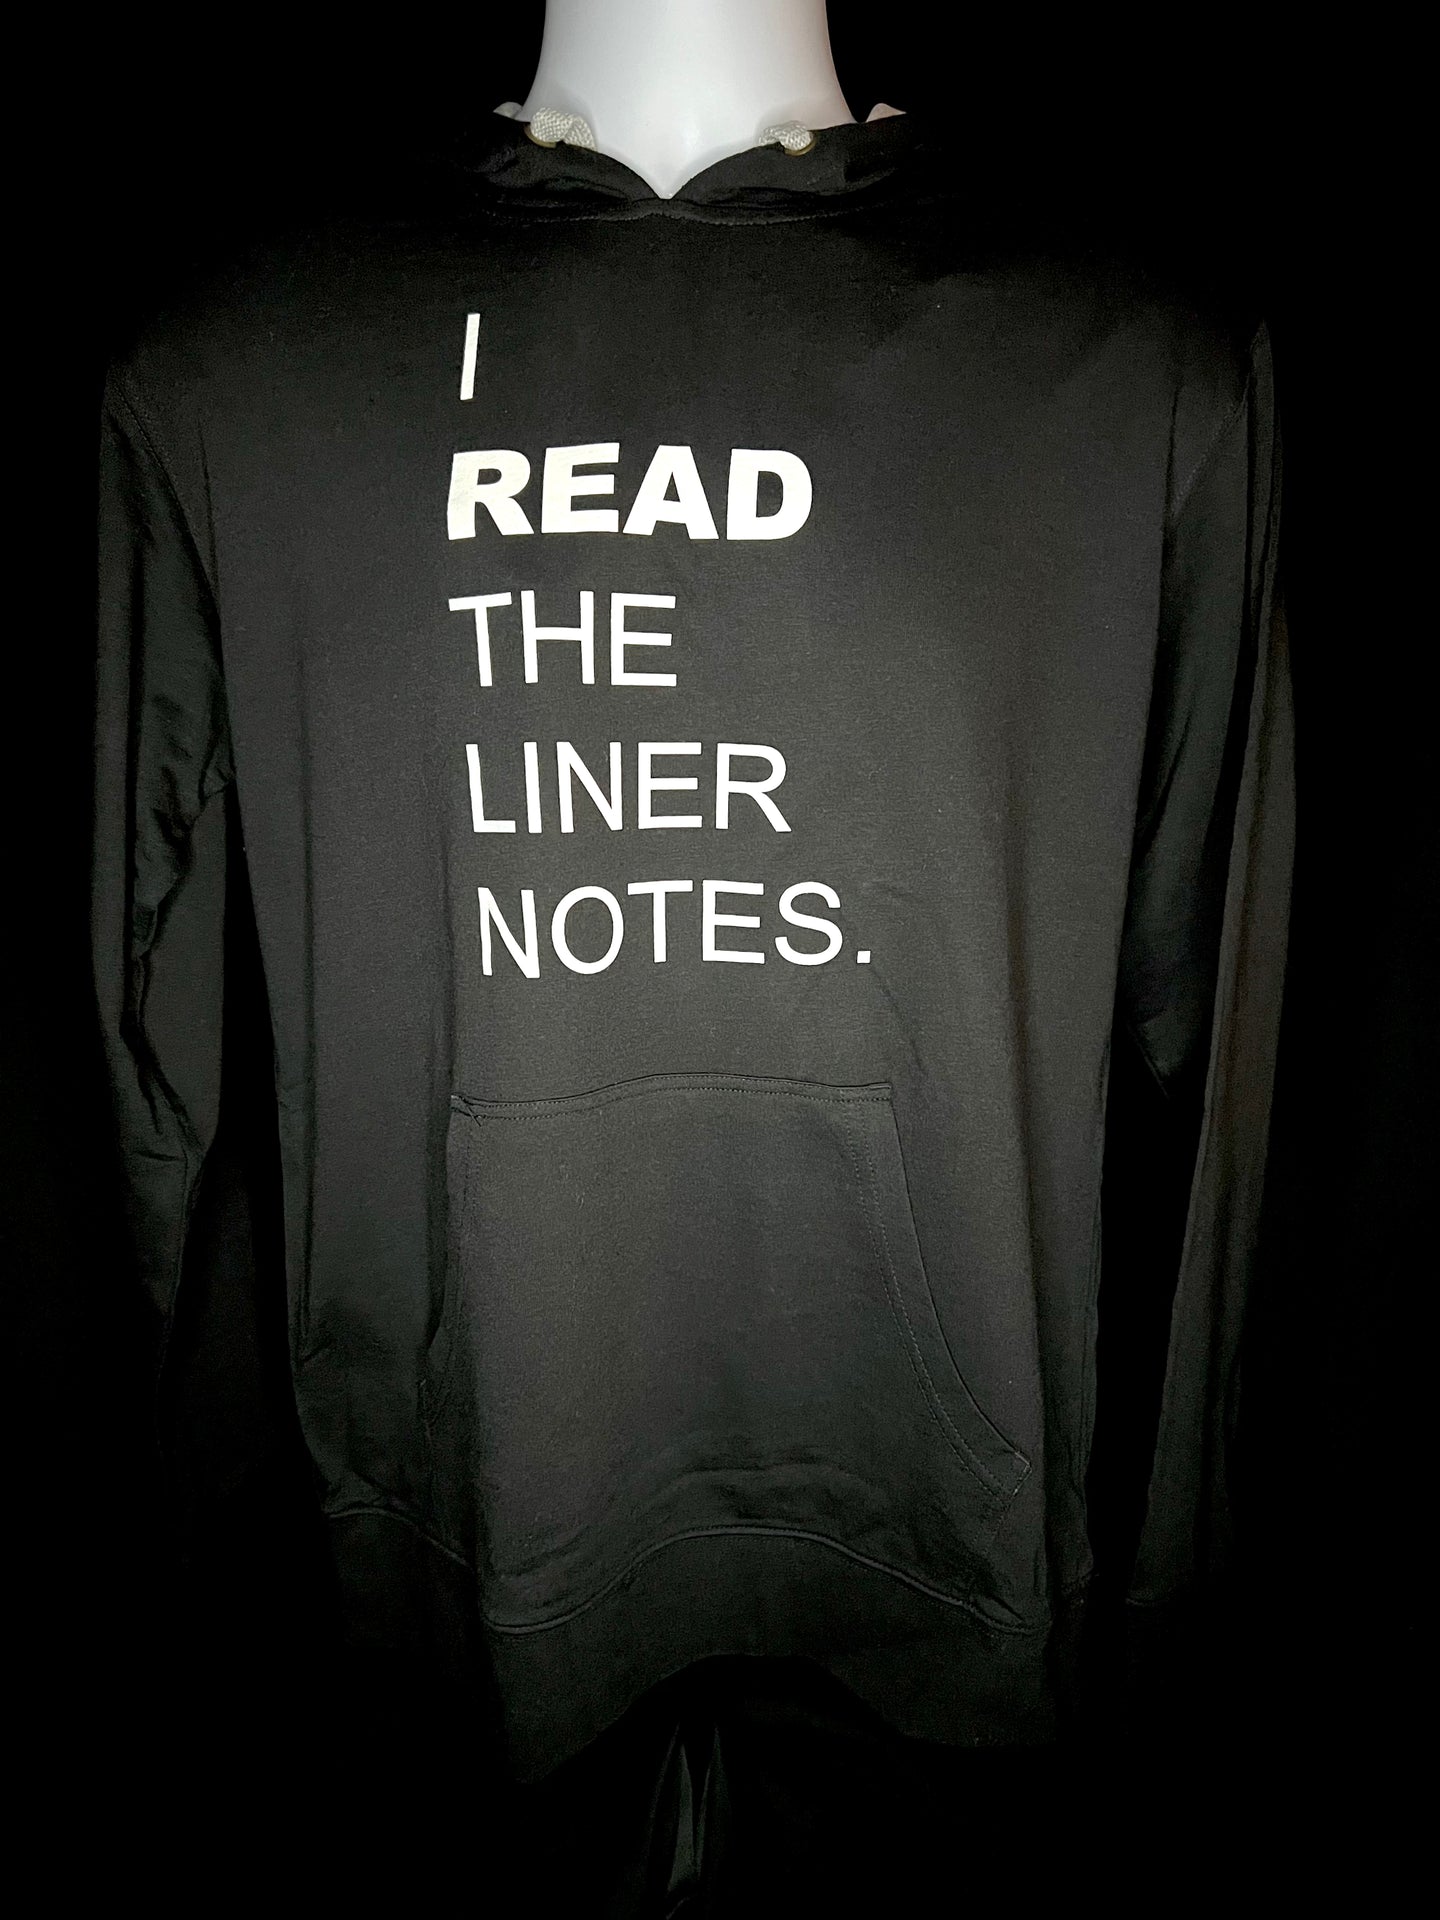 I Read The Liner Notes.® - Black Hoodie (Unisex)